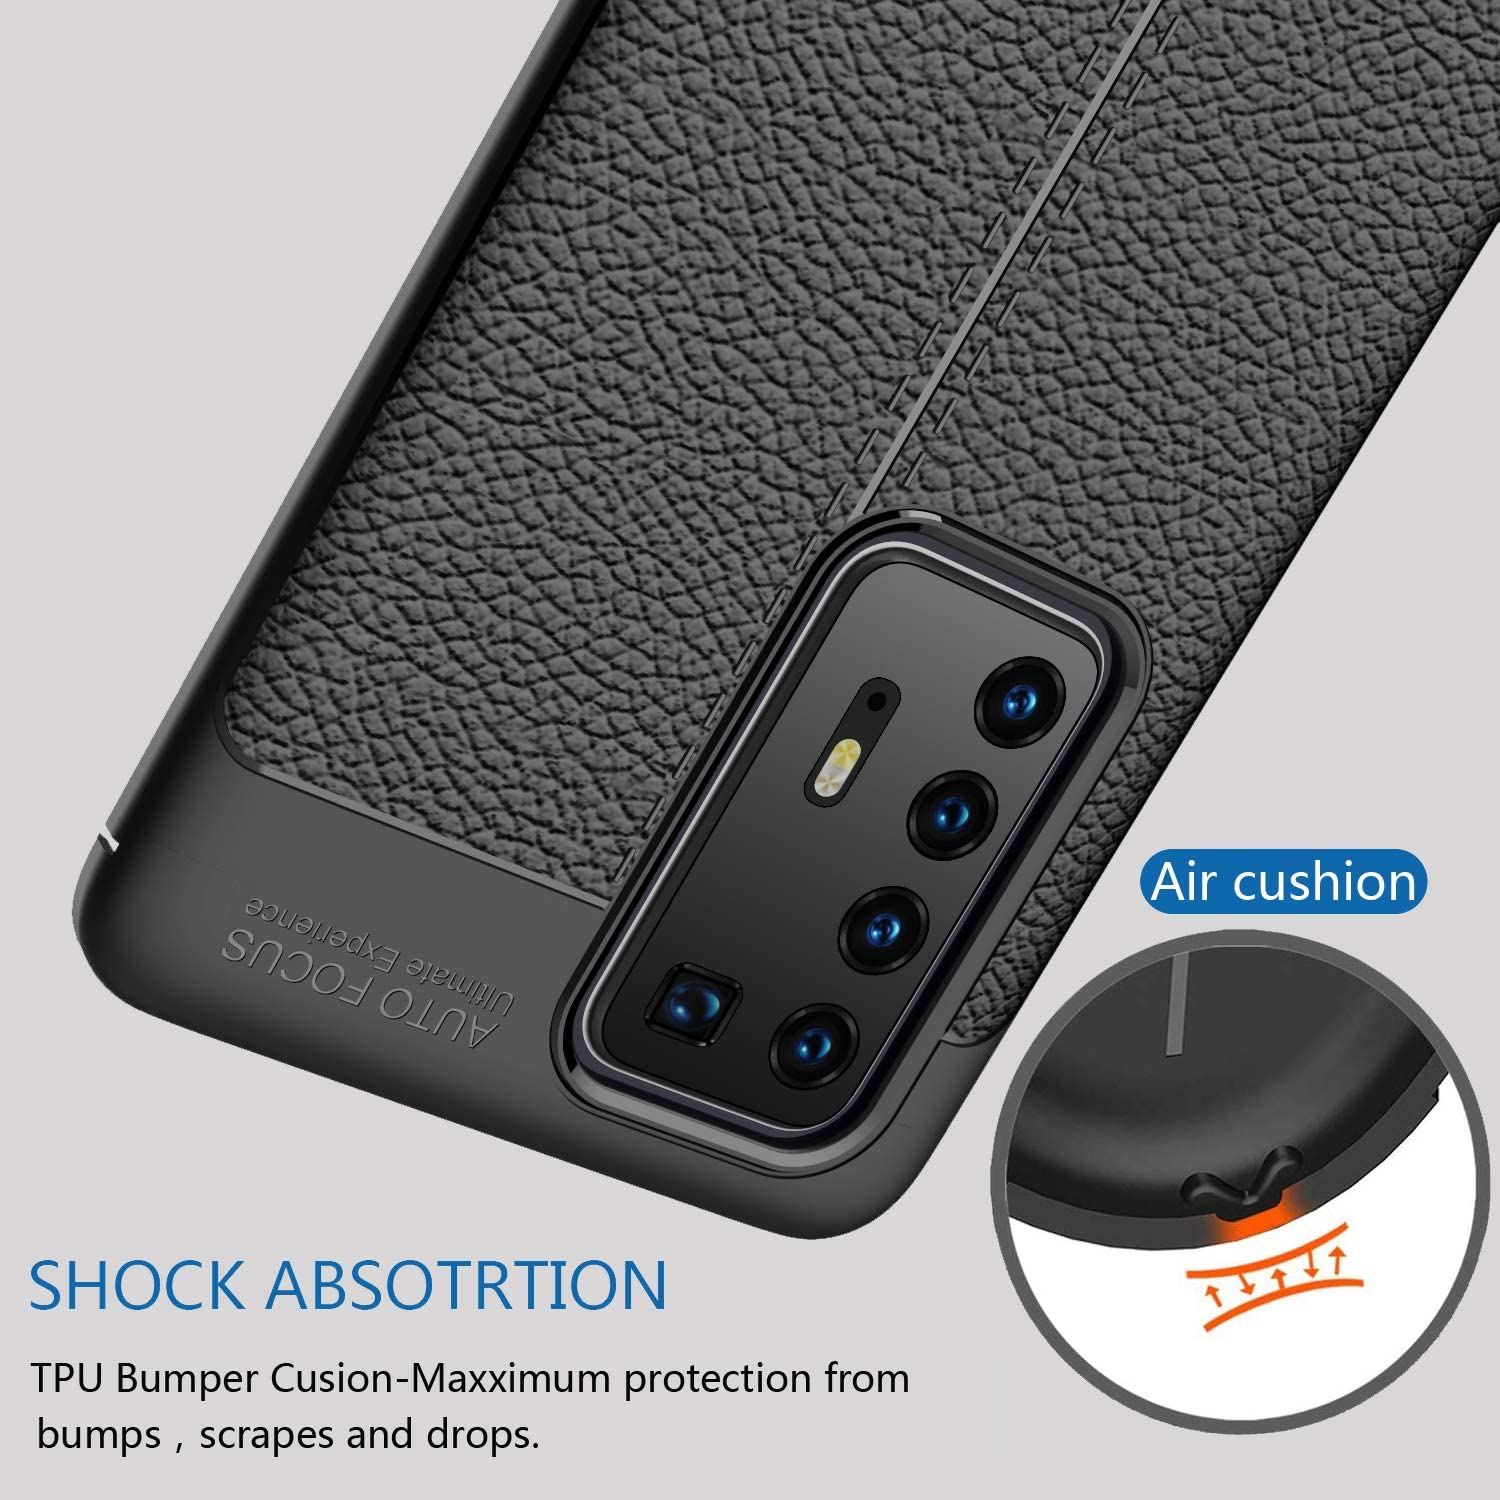 Leather Texture design Bumper Protective Cover for Huawei P20